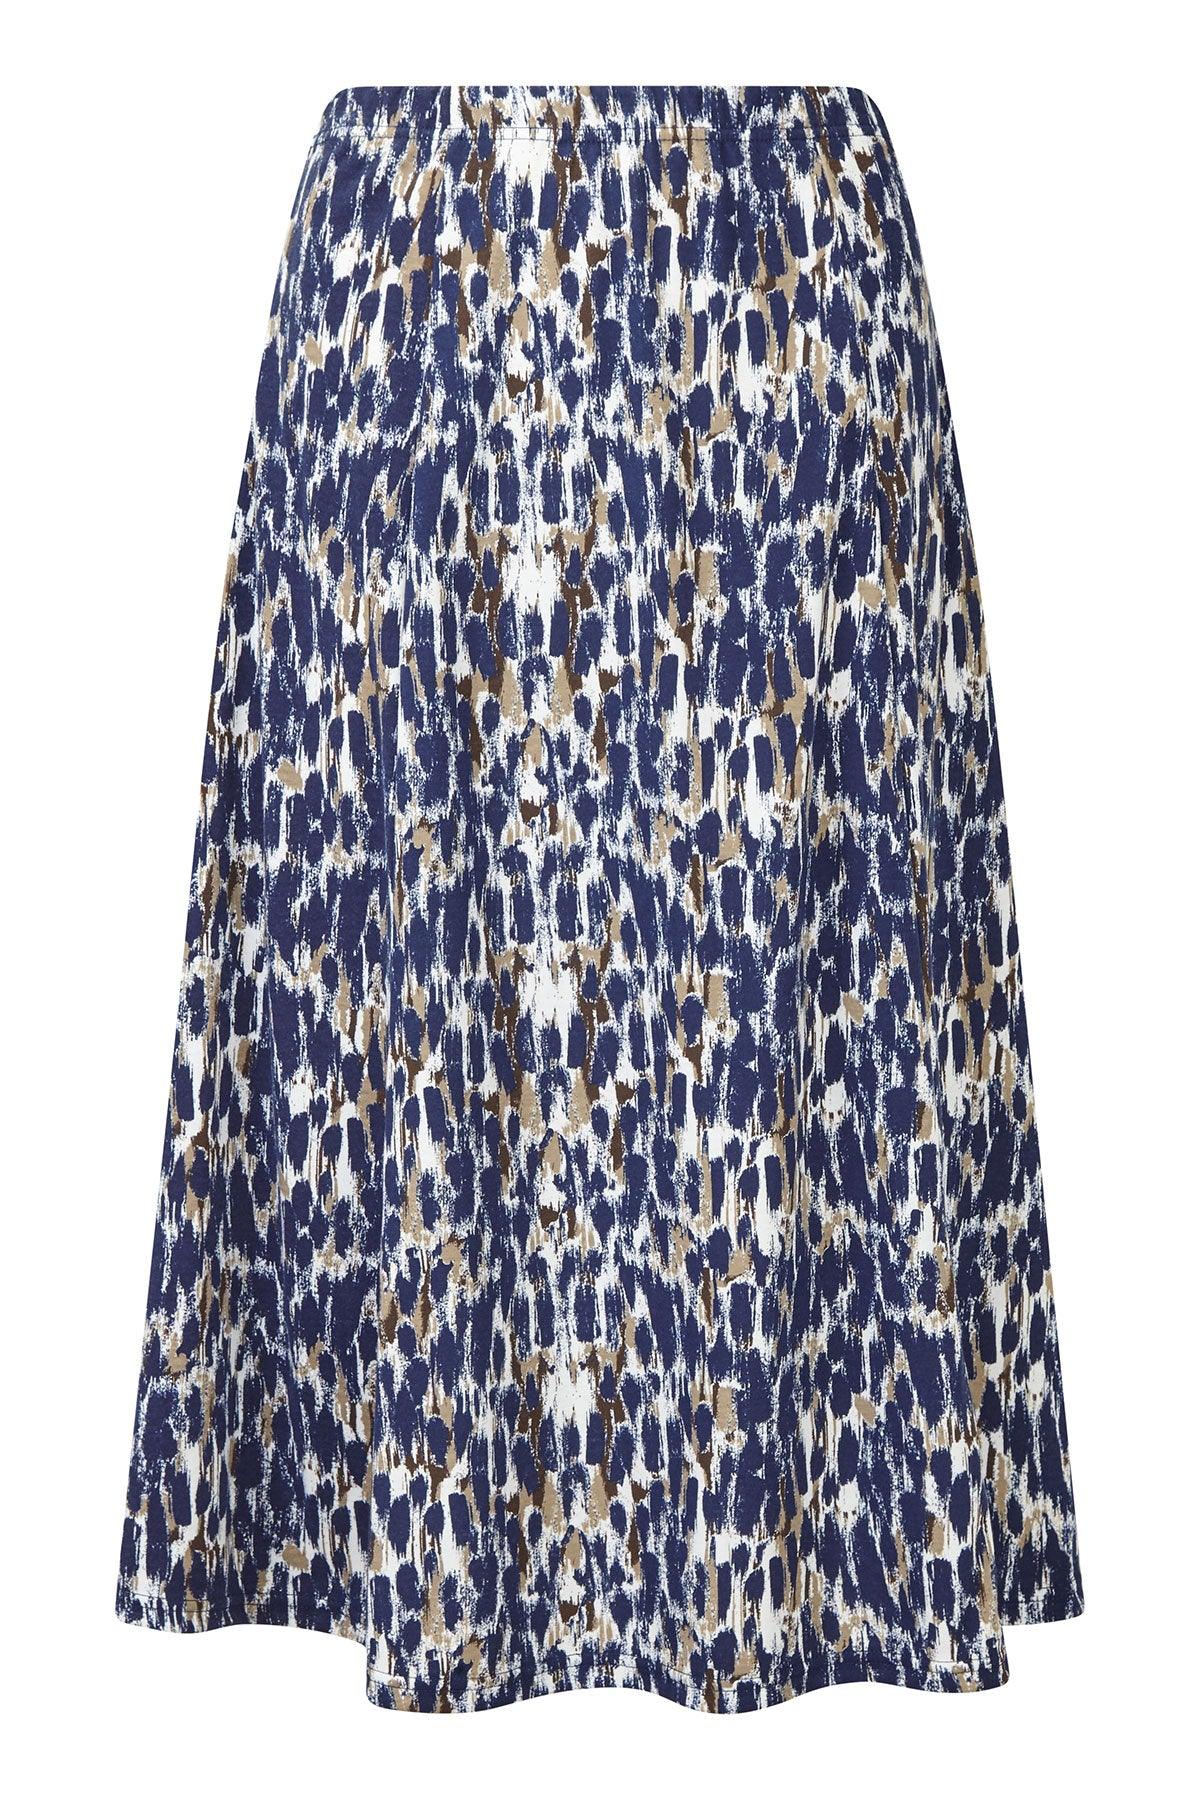 Betsy Albany Printed Skirt - Carr & Westley